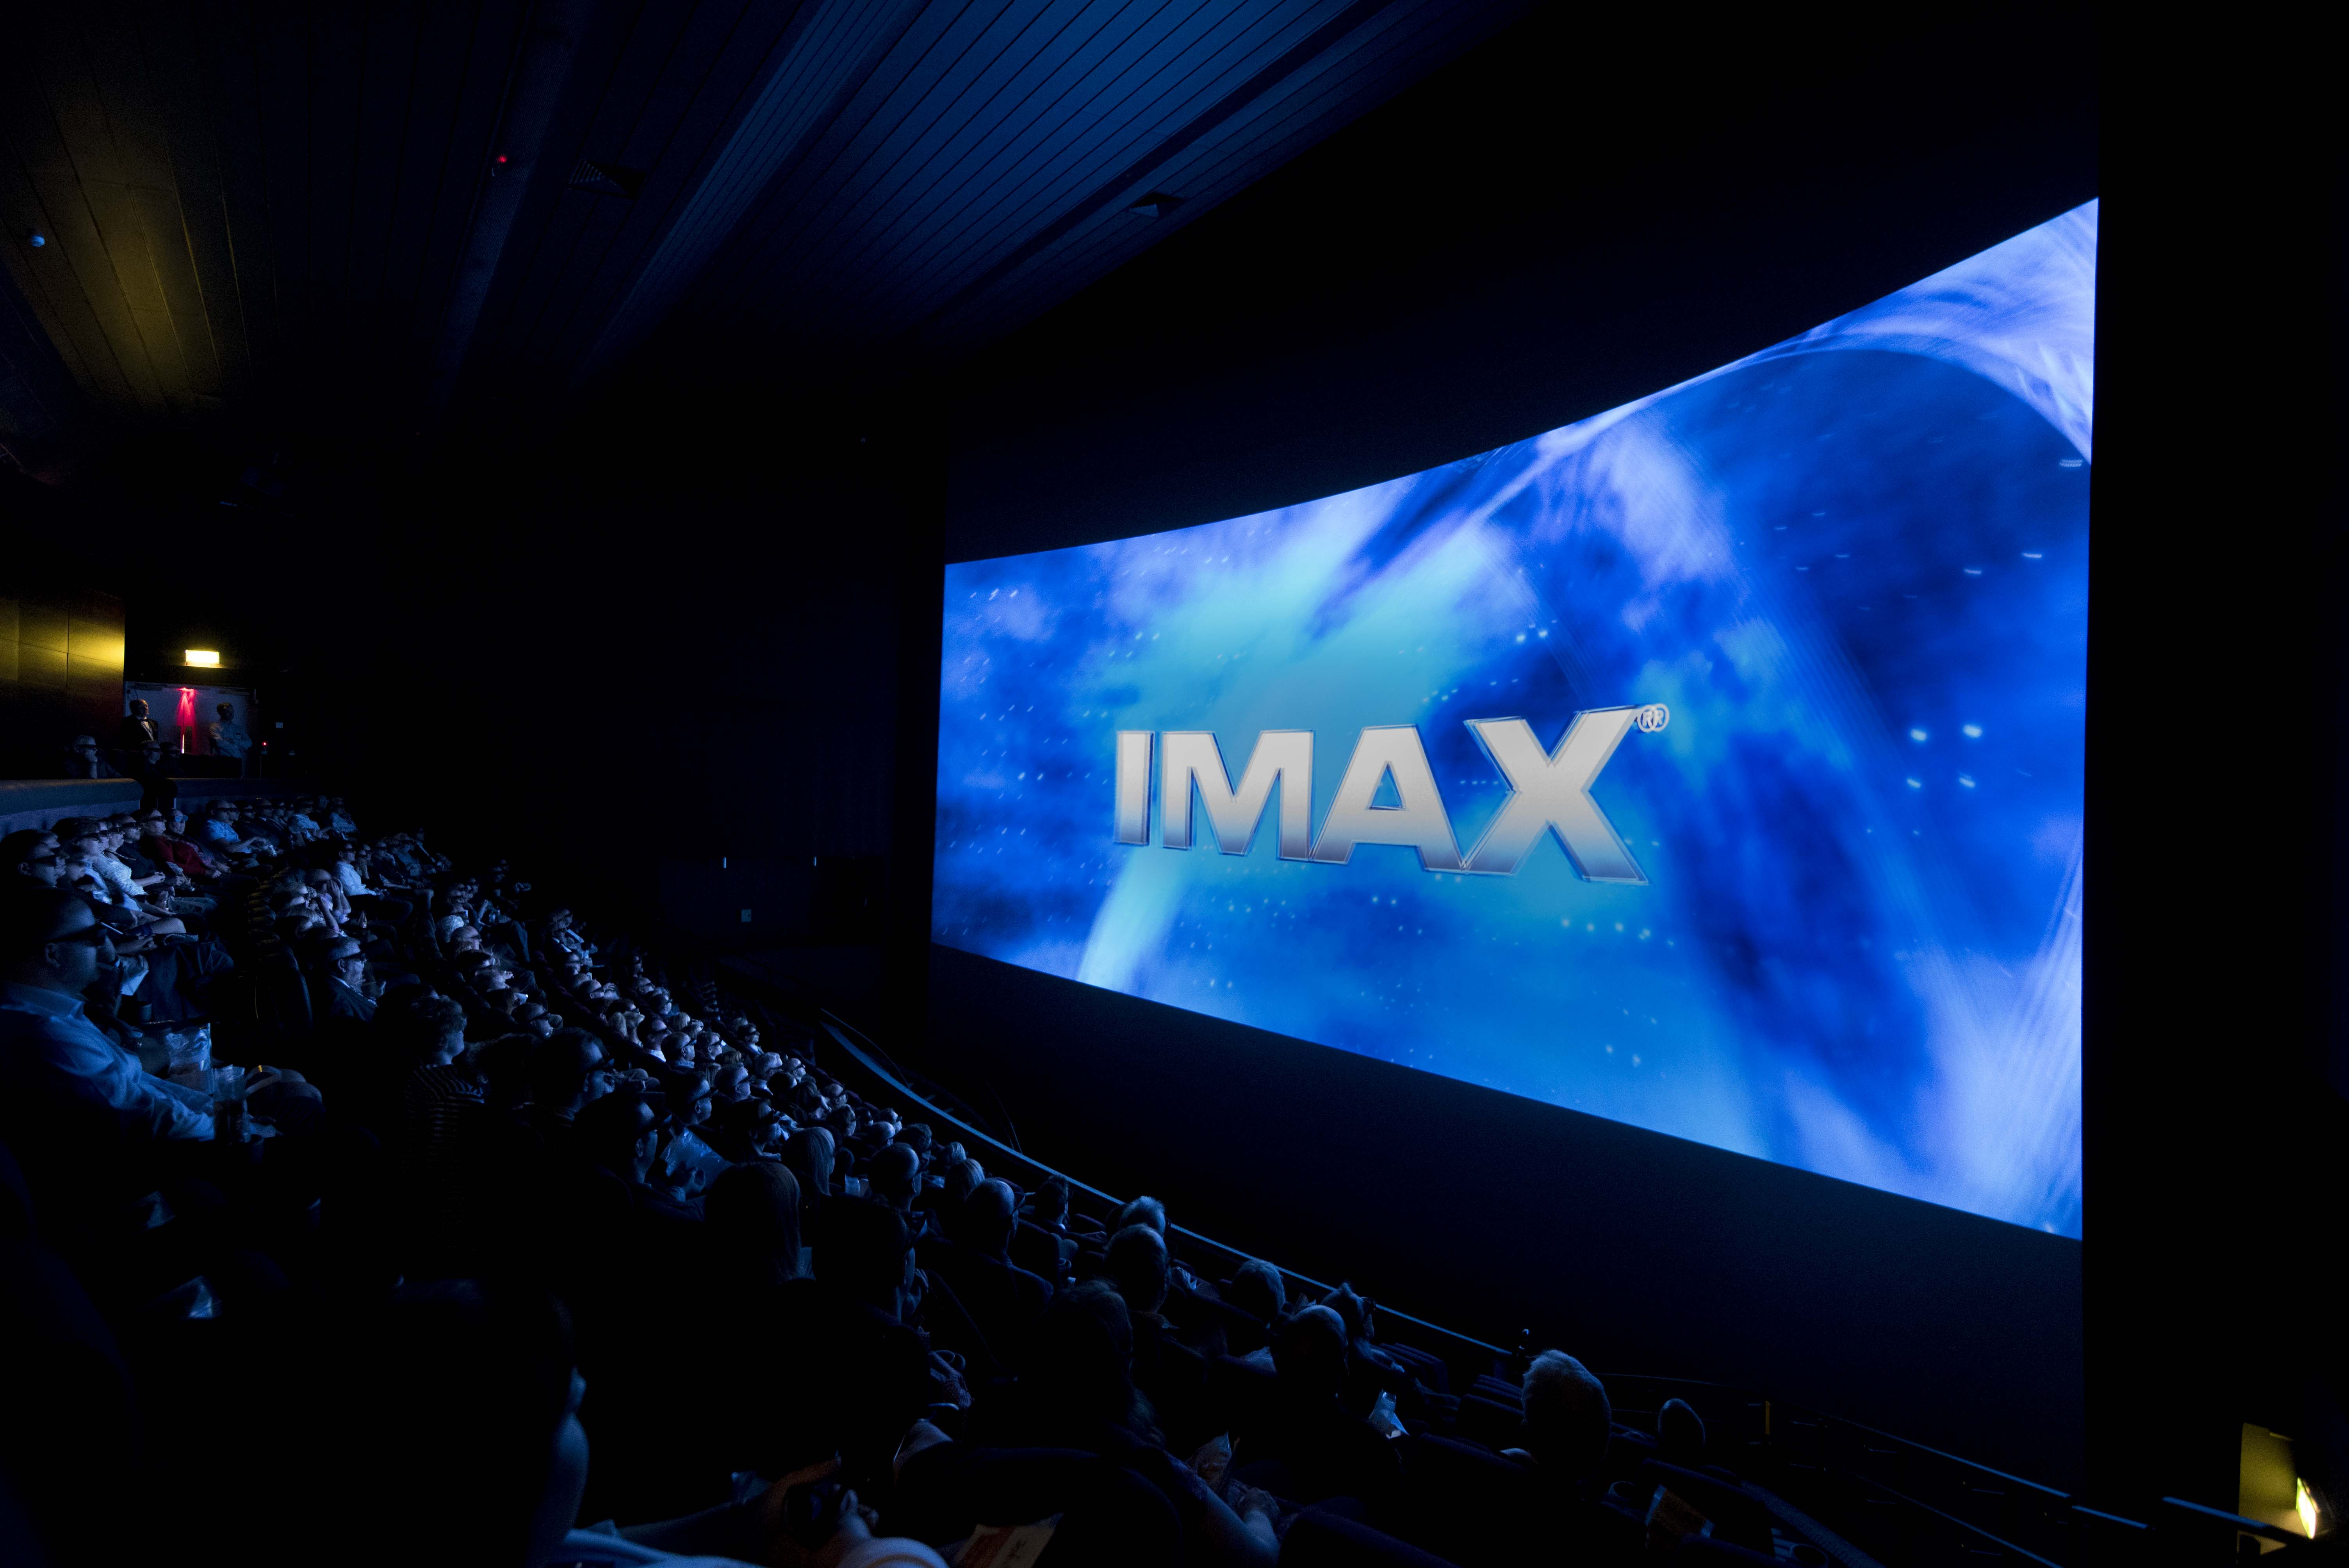 IMAX cinema at the National Science and Media Museum in Bradford